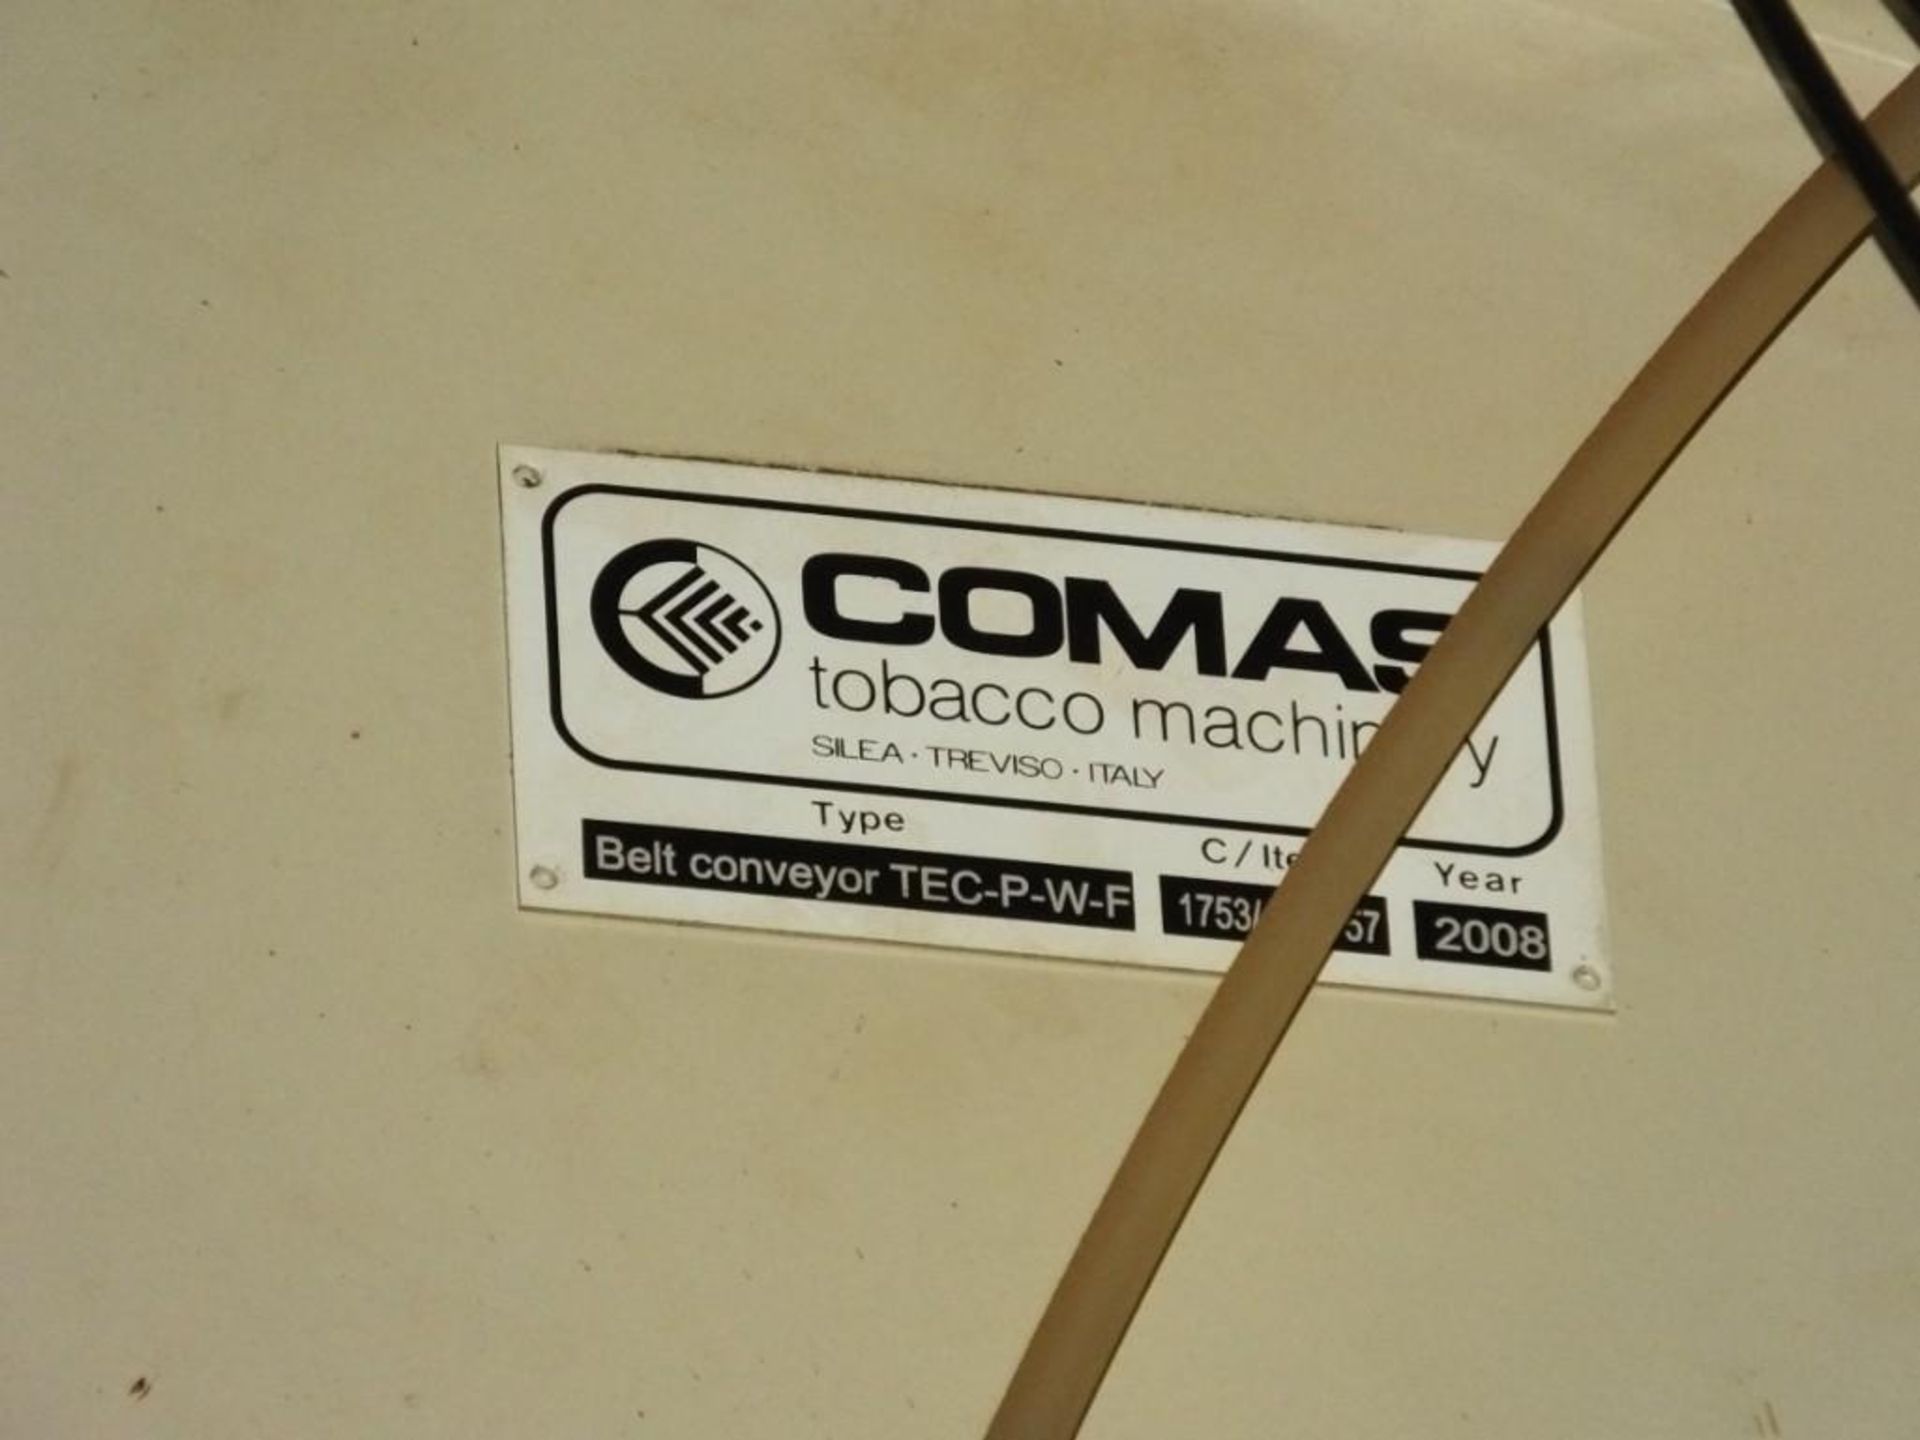 2008 Comas Primary to Secondary Covered Conveyor System - Image 10 of 11